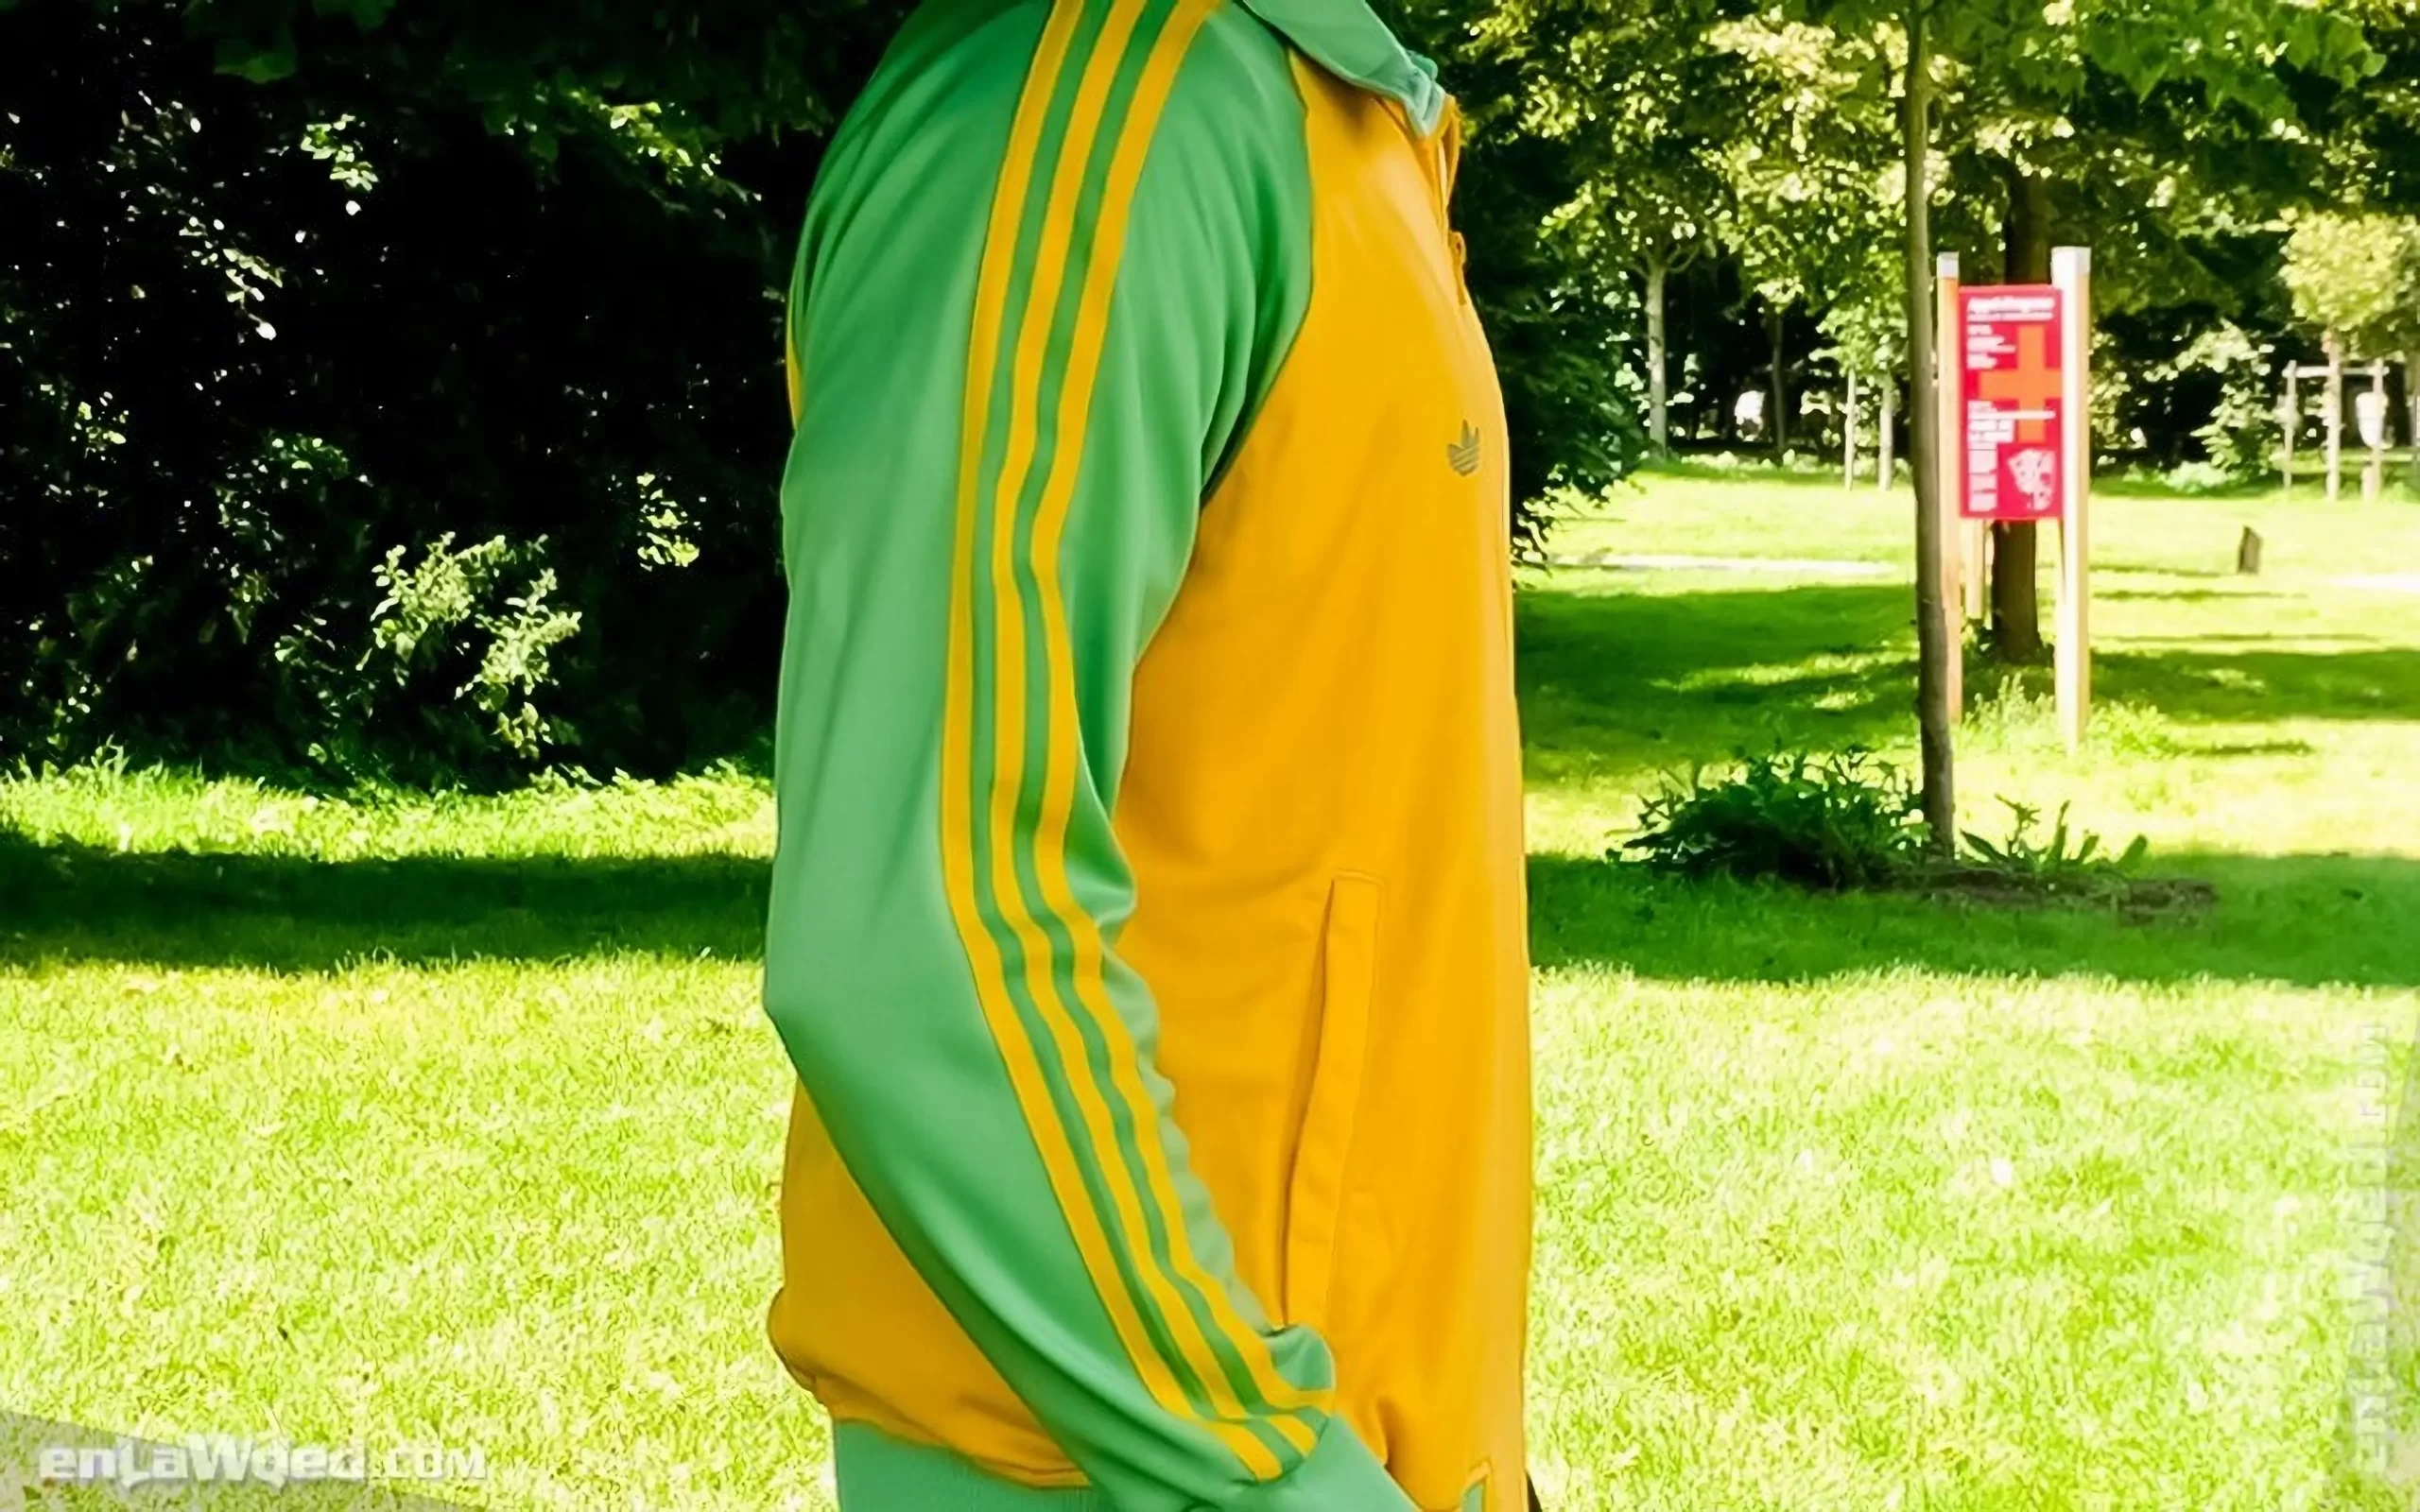 Men’s 2003 Zimbabwe Track Top by Adidas: Indulgence (EnLawded.com file #lmcgzpor5t6taprooug)